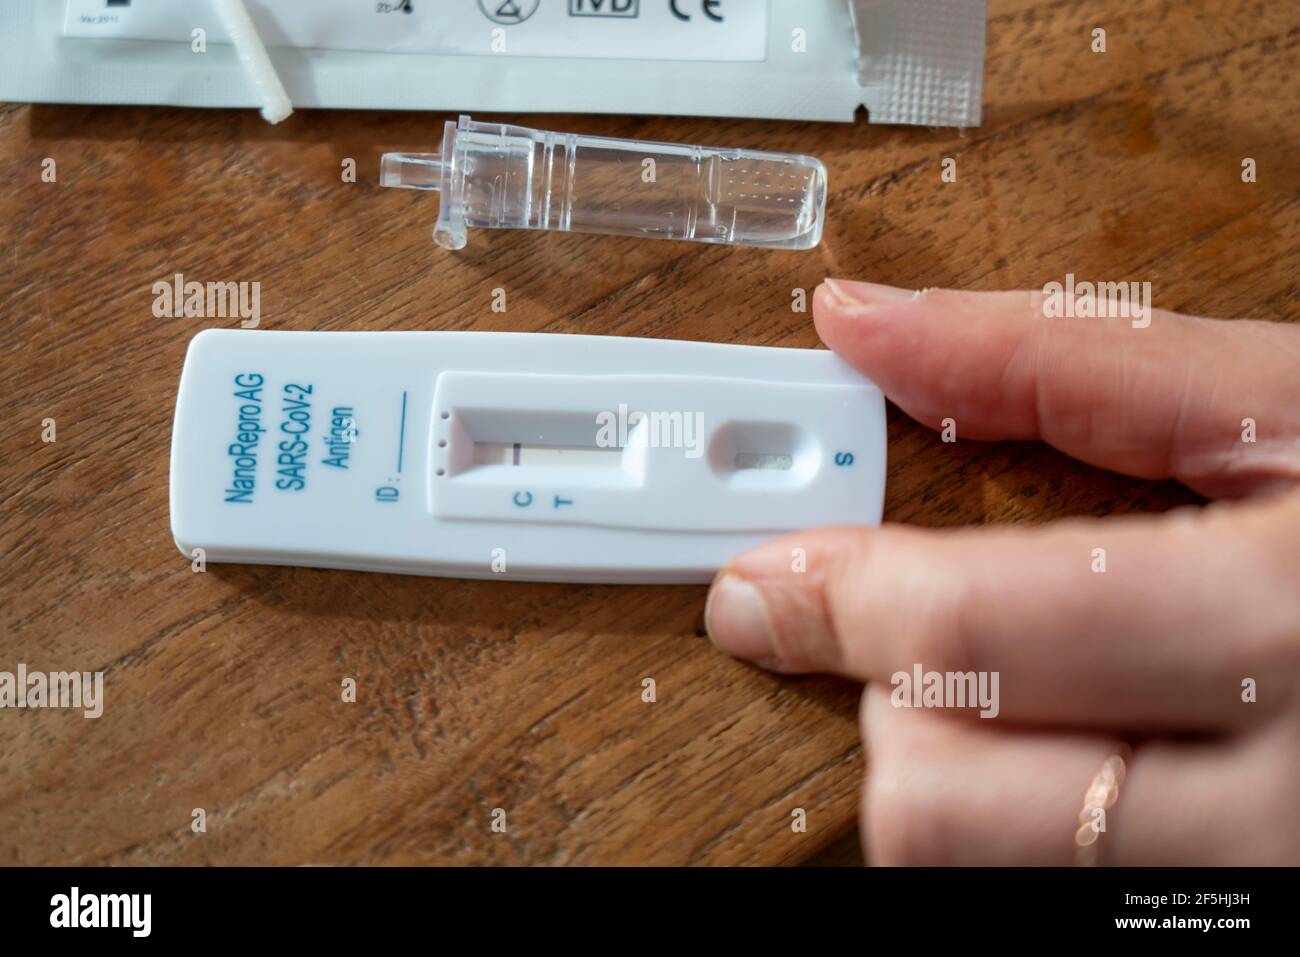 Corona Antigen Rapid Test, lay test, self-test, for the detection of SARS-CoV-2 infection, test result, negative, Stock Photo